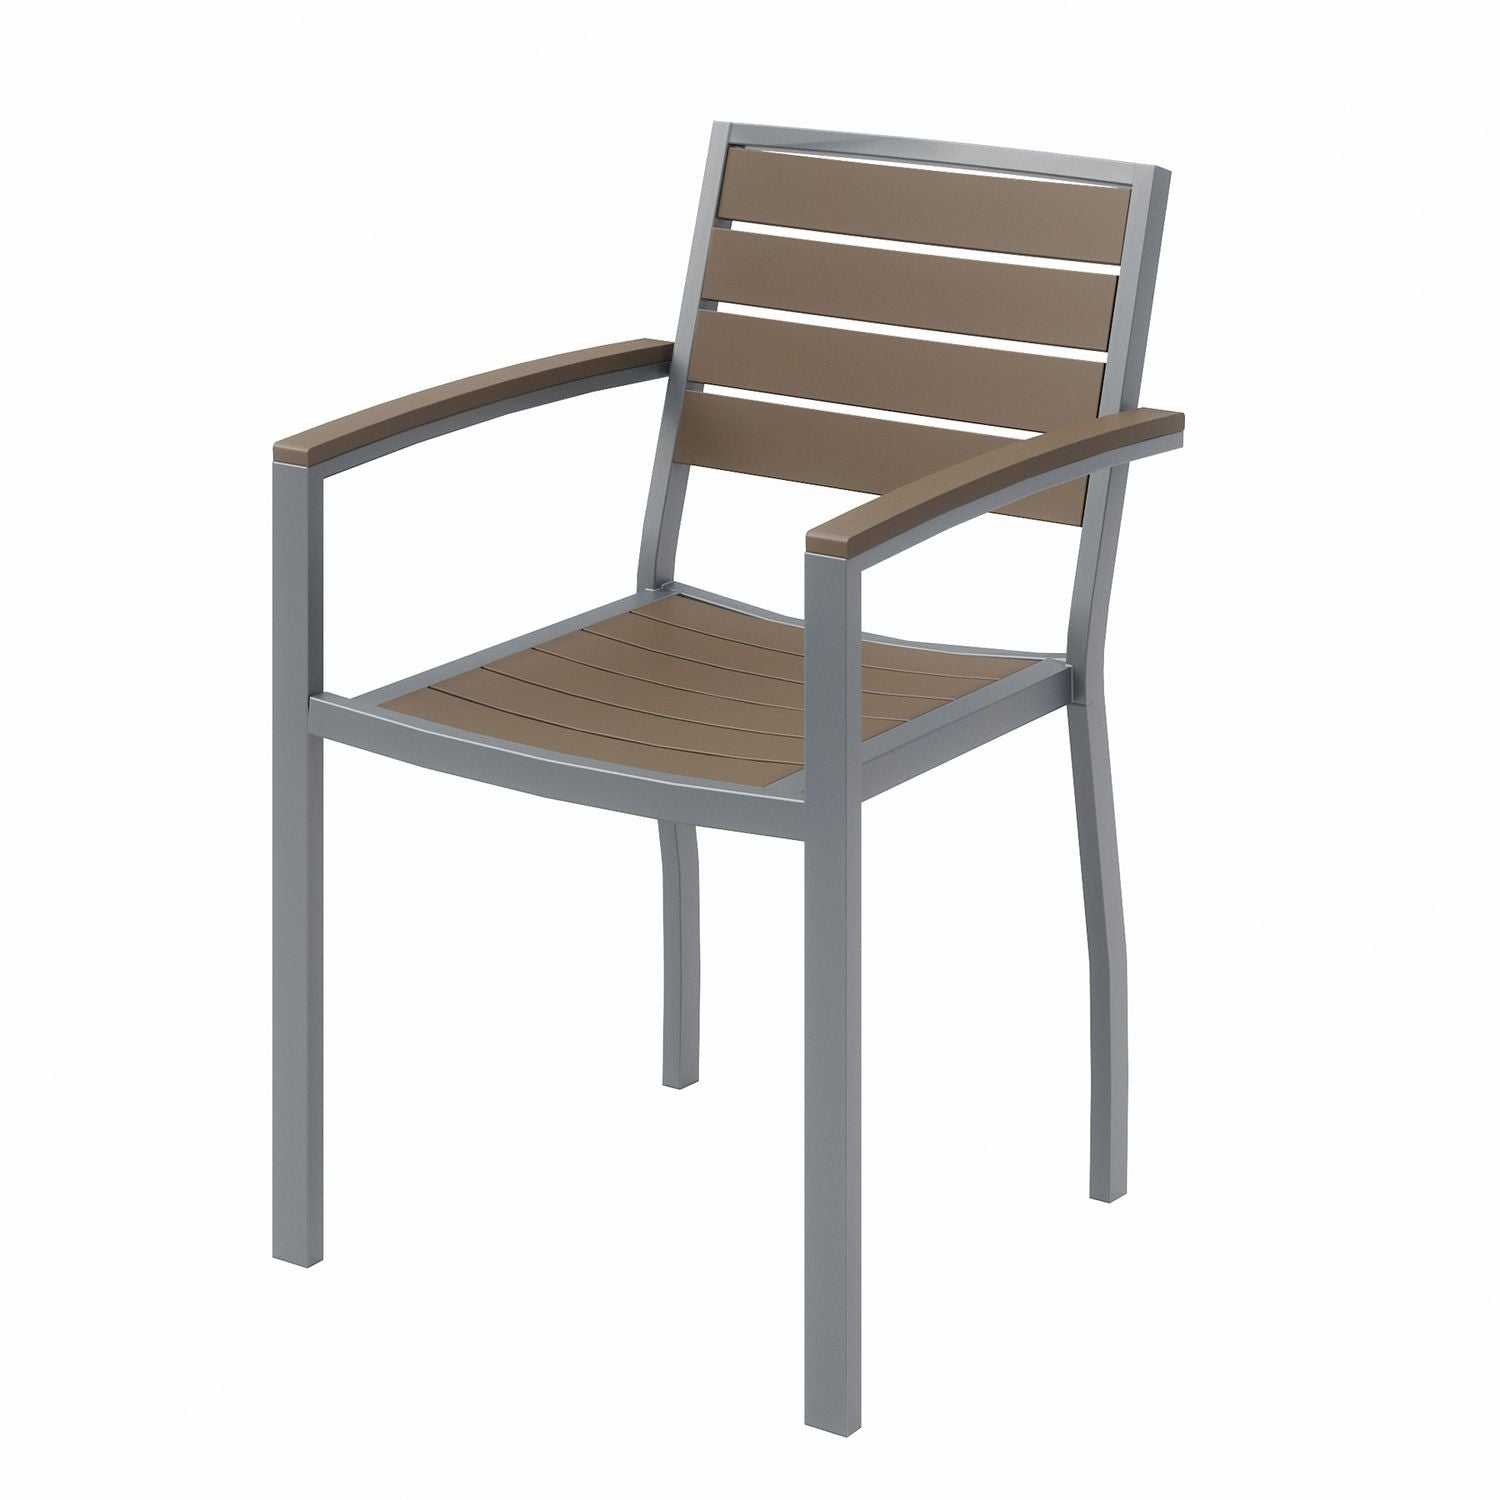 eveleen-outdoor-patio-table-with-four-mocha-powder-coated-polymer-chairs-square-32-mocha-ships-in-4-6-business-days_kfi840031918543 - 3